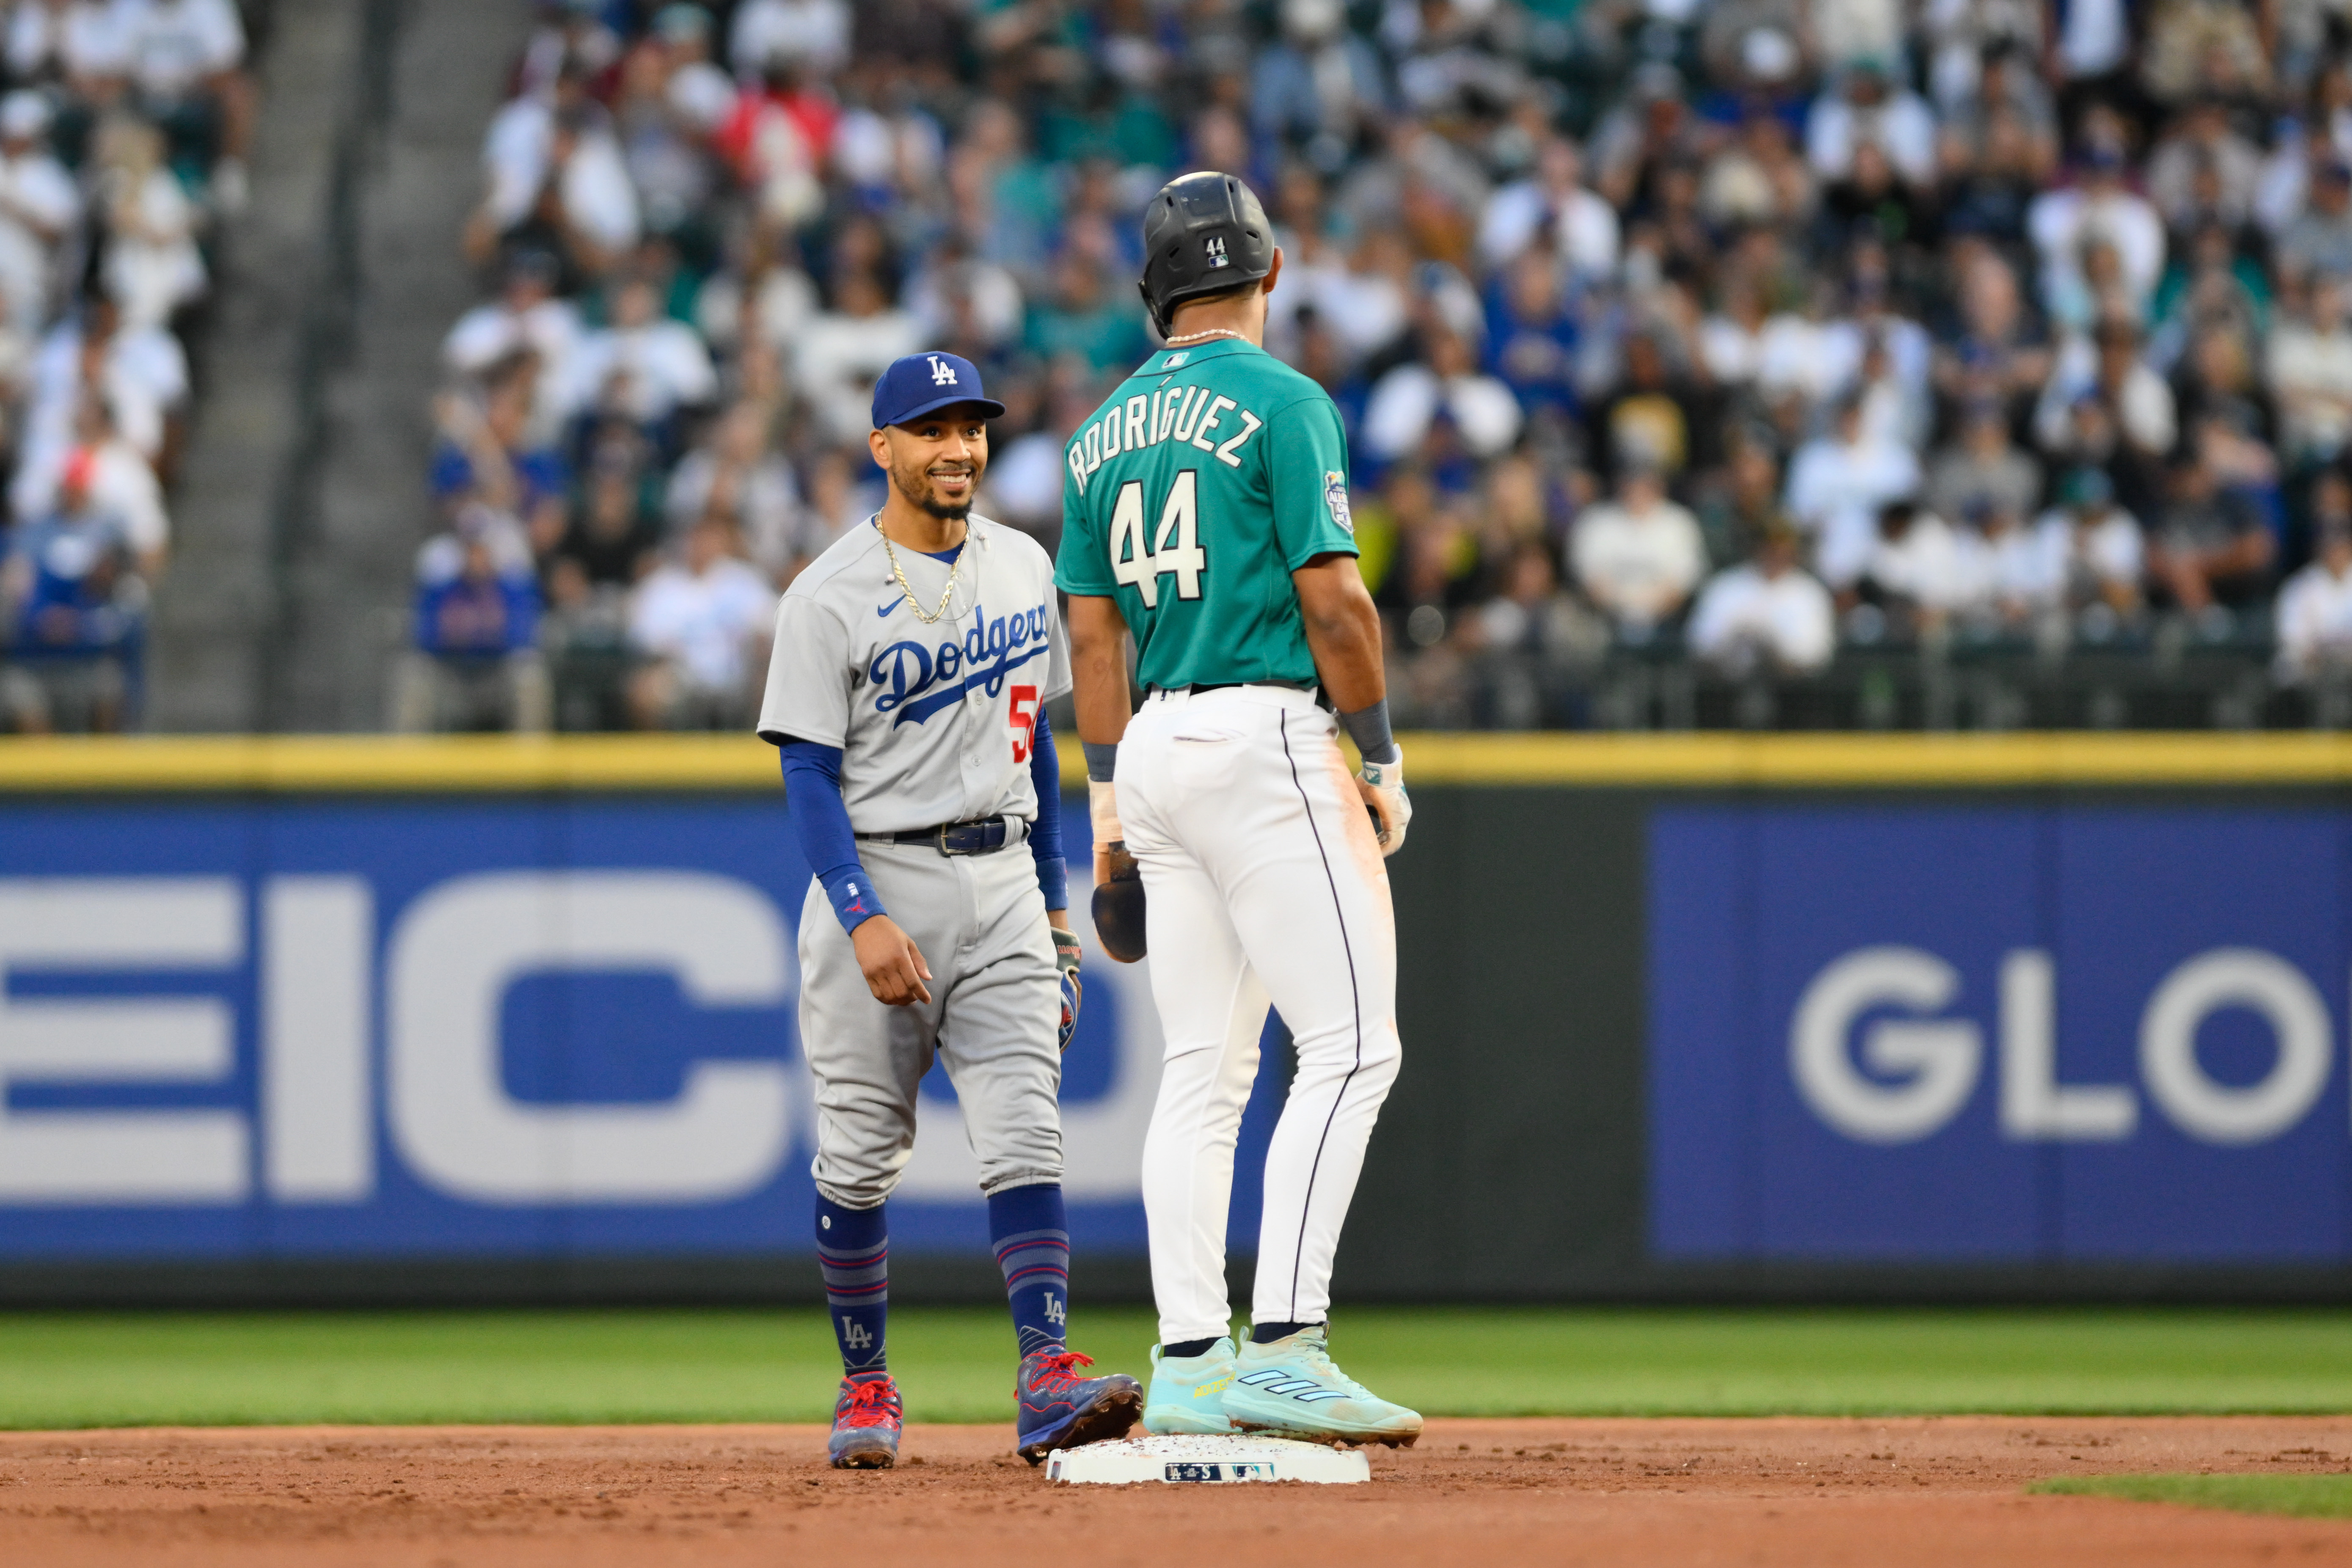 Dodgers clinch NL West title with 6-2 win over Mariners for 10th